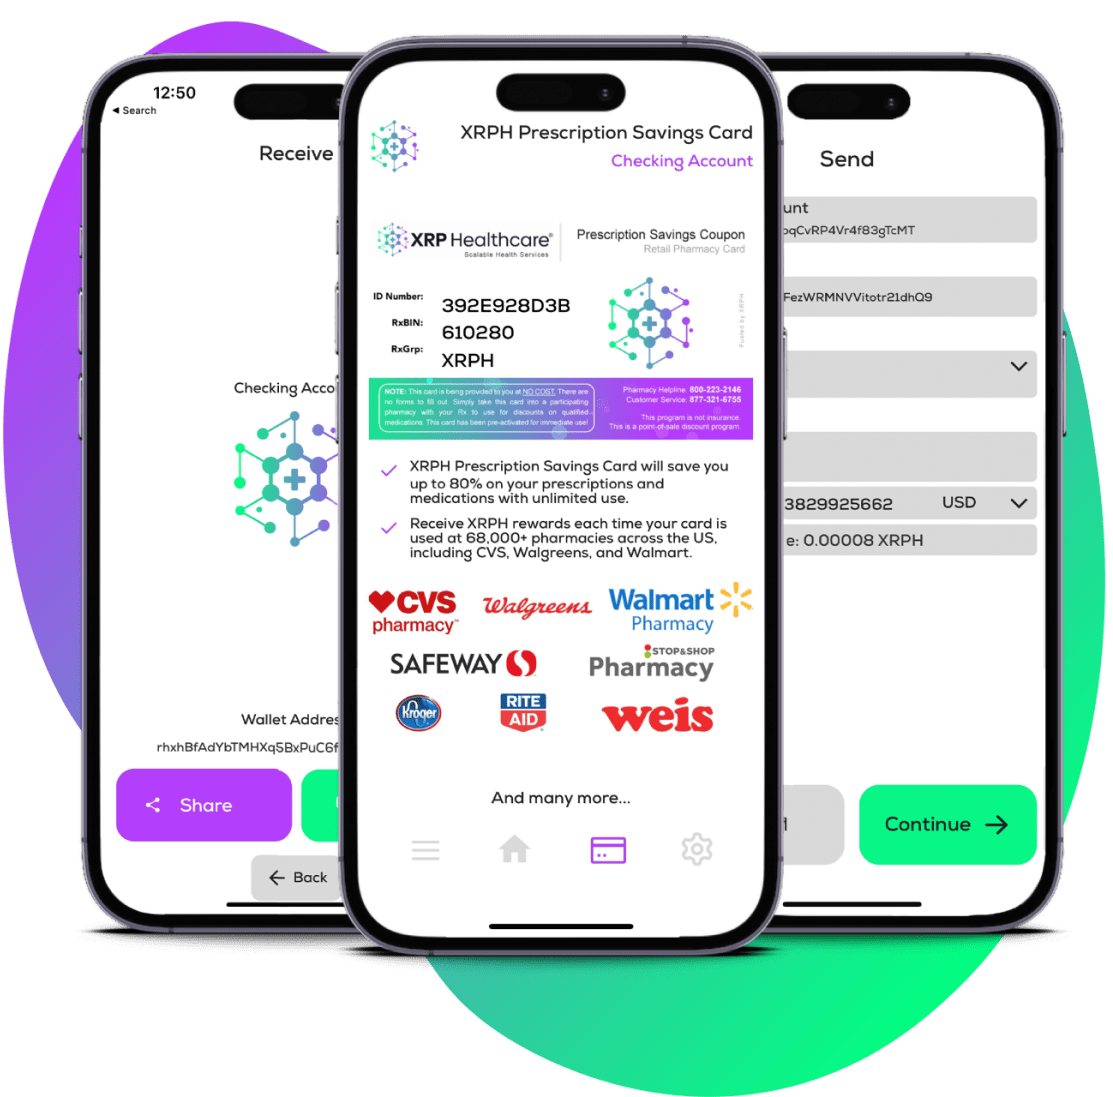 xrph wallet and app